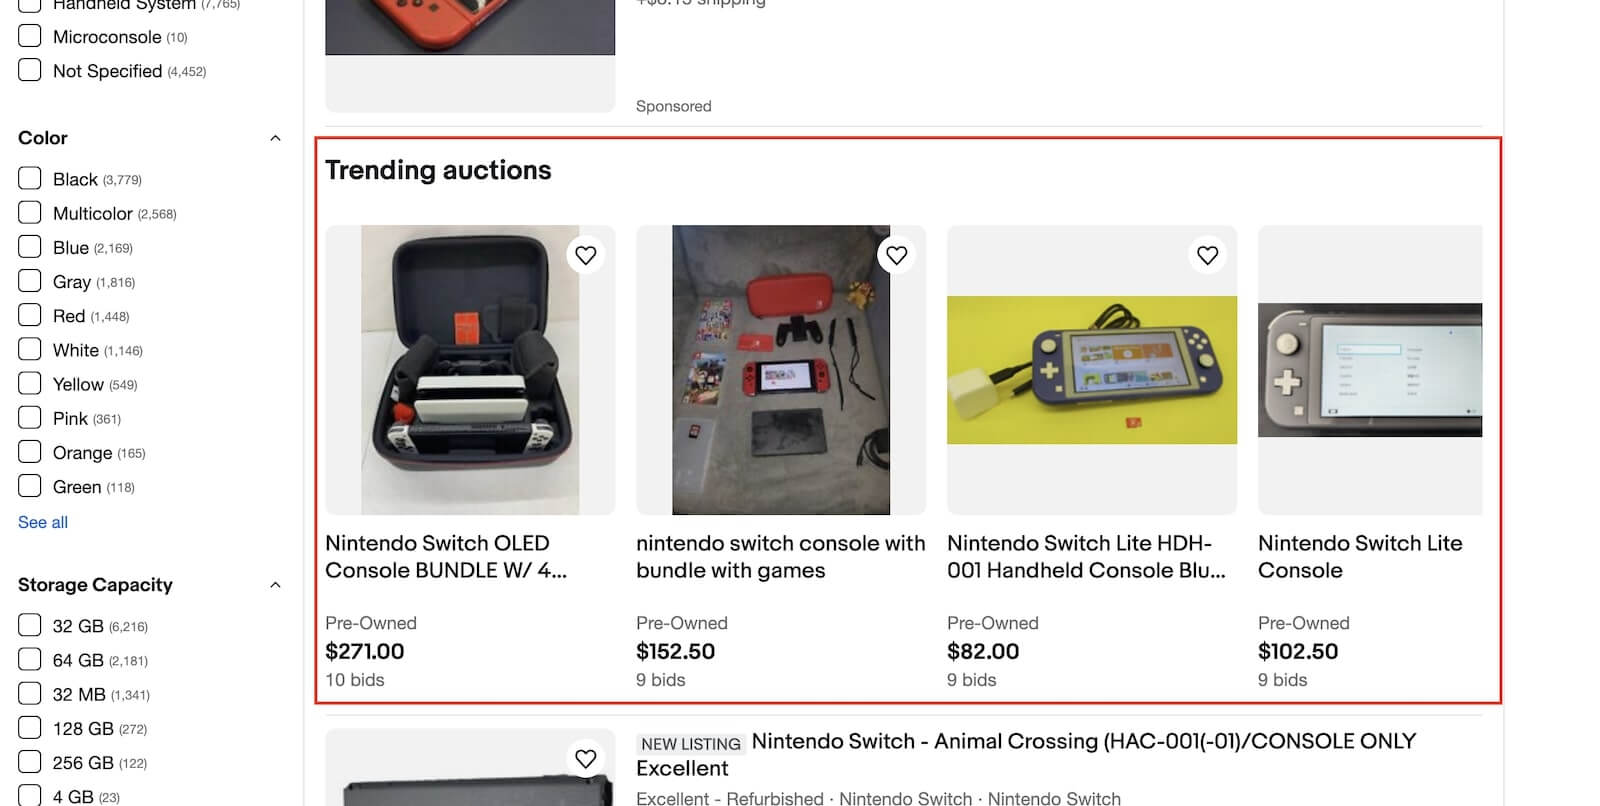 Example results: Nintendo Switch results that shows Trending auctions section